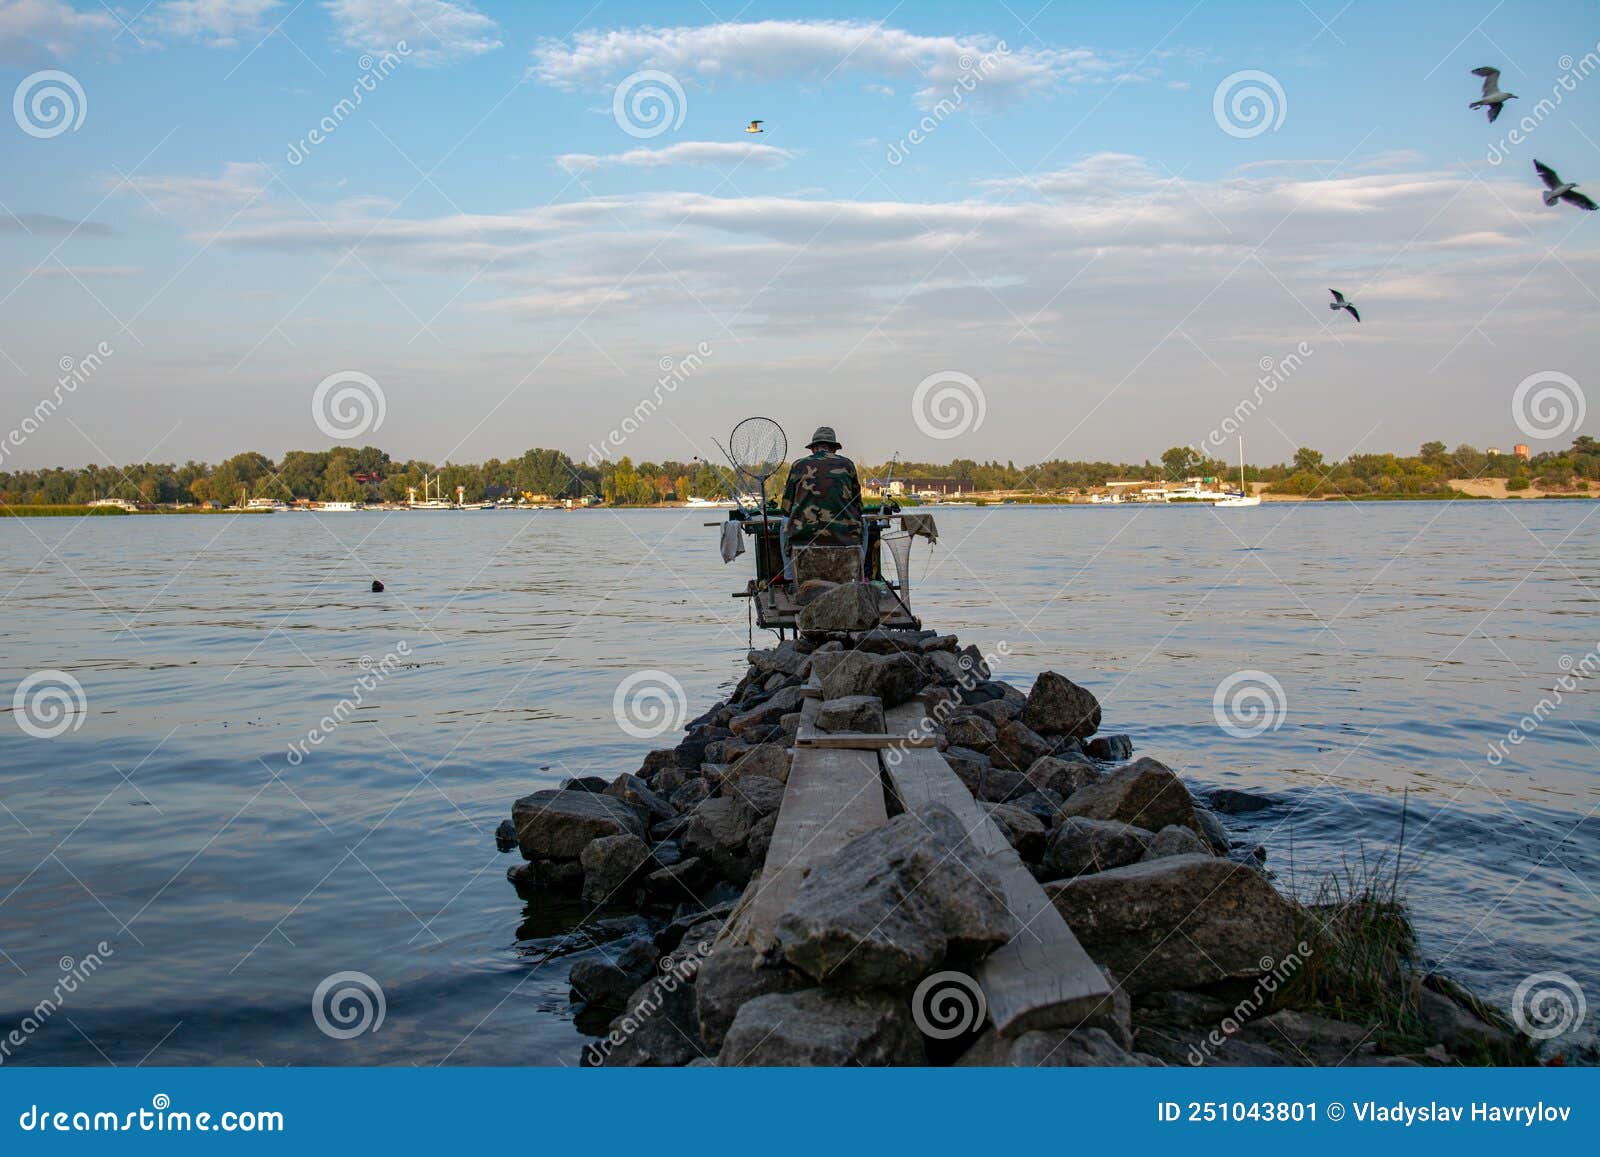 Back View of Fisherman with a Lot of Fishing Rods and a Net for Fish.  Fishing on the River Stock Image - Image of summer, back: 251043801